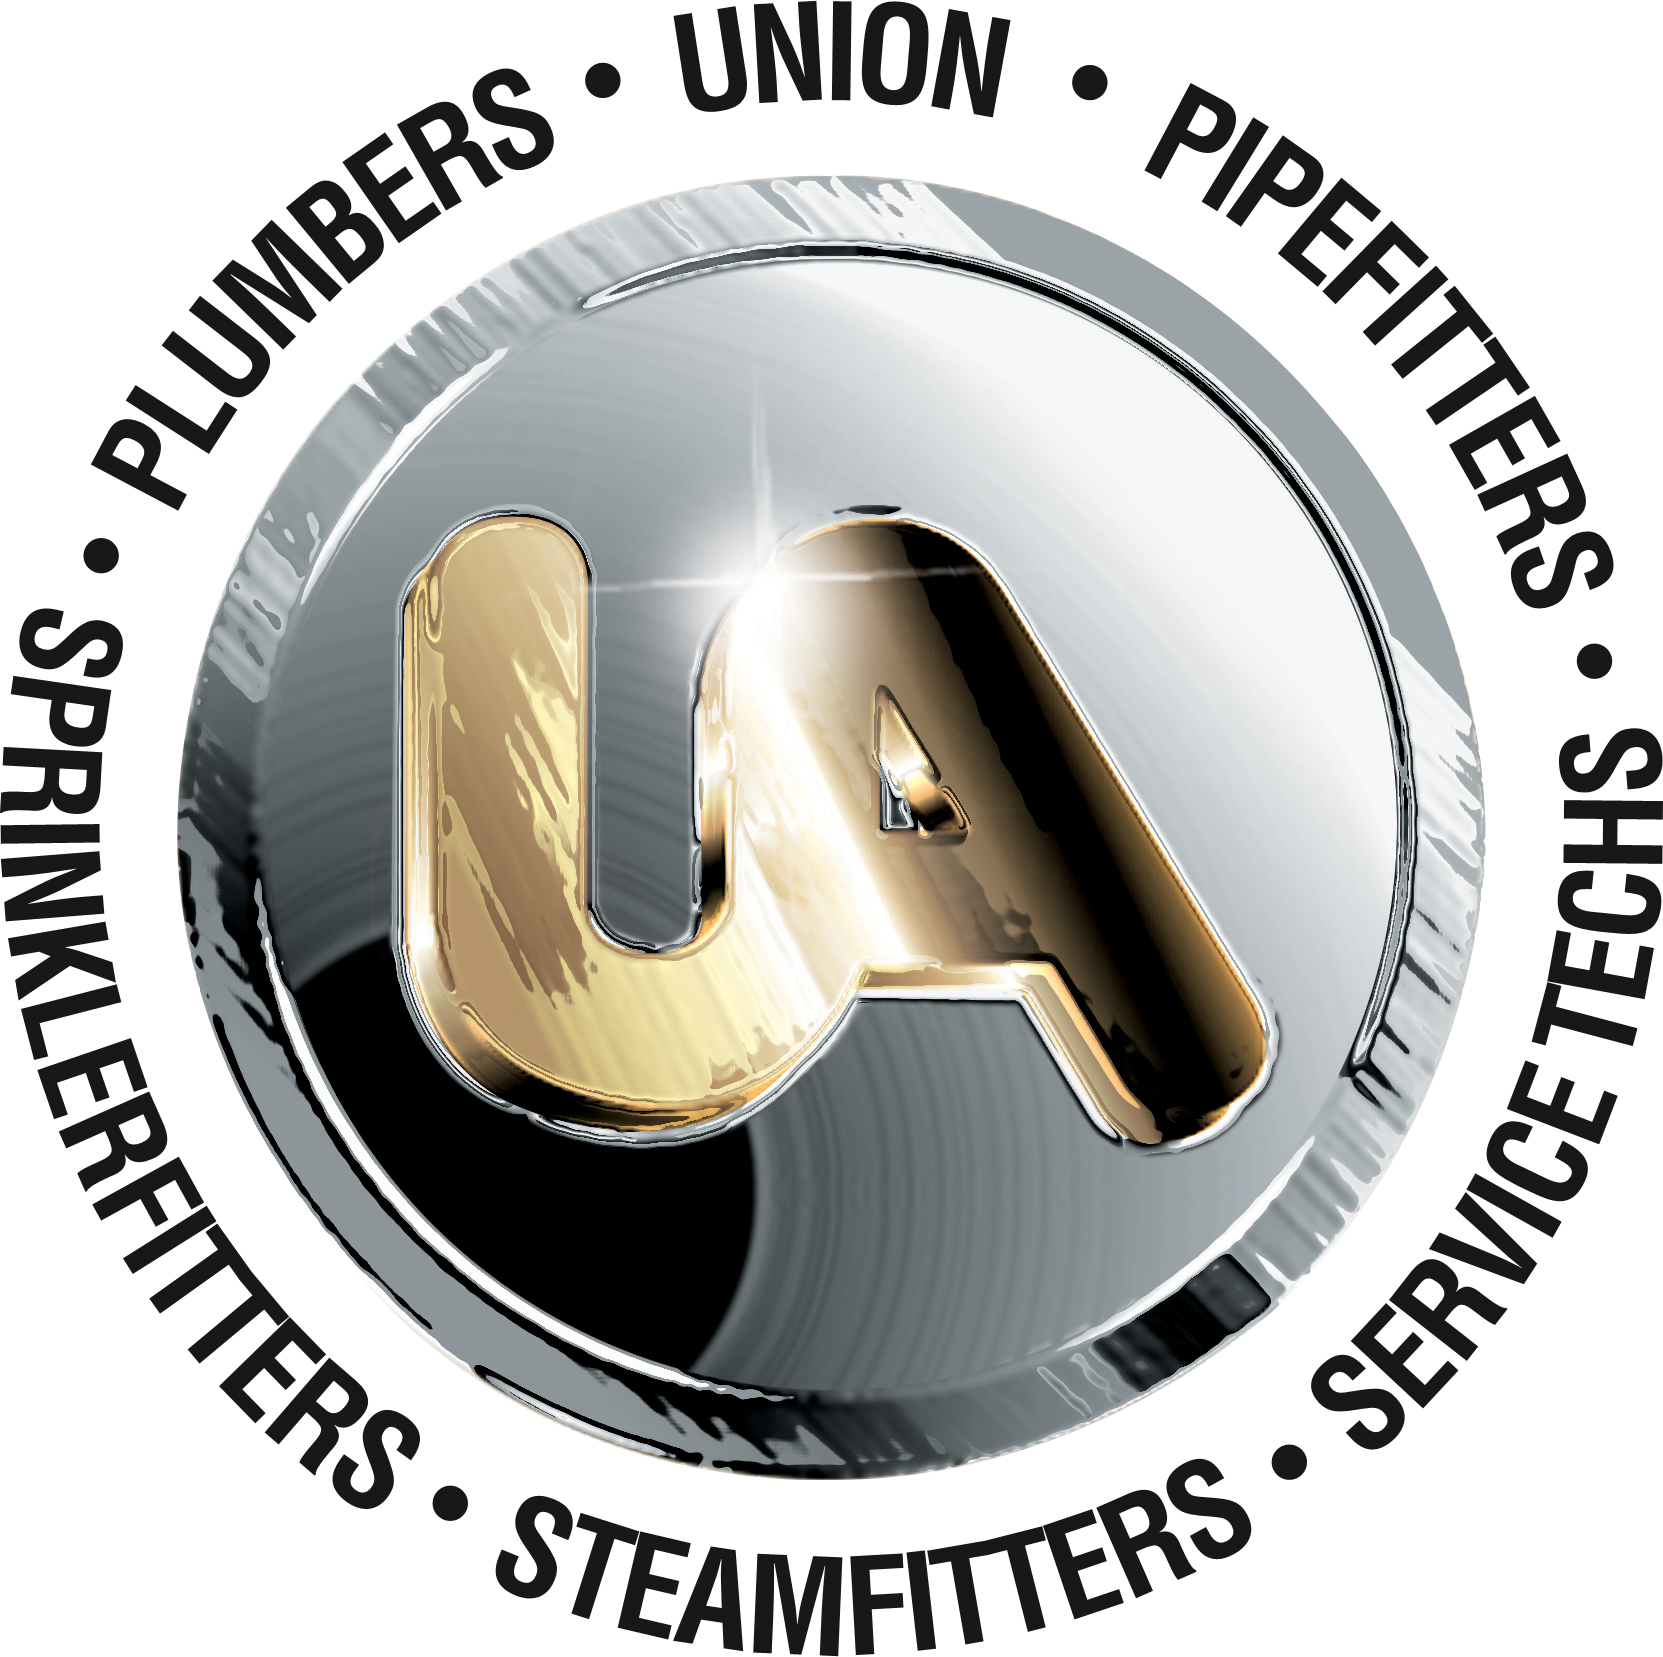 Plumbers & Pipefitters Local Union 333